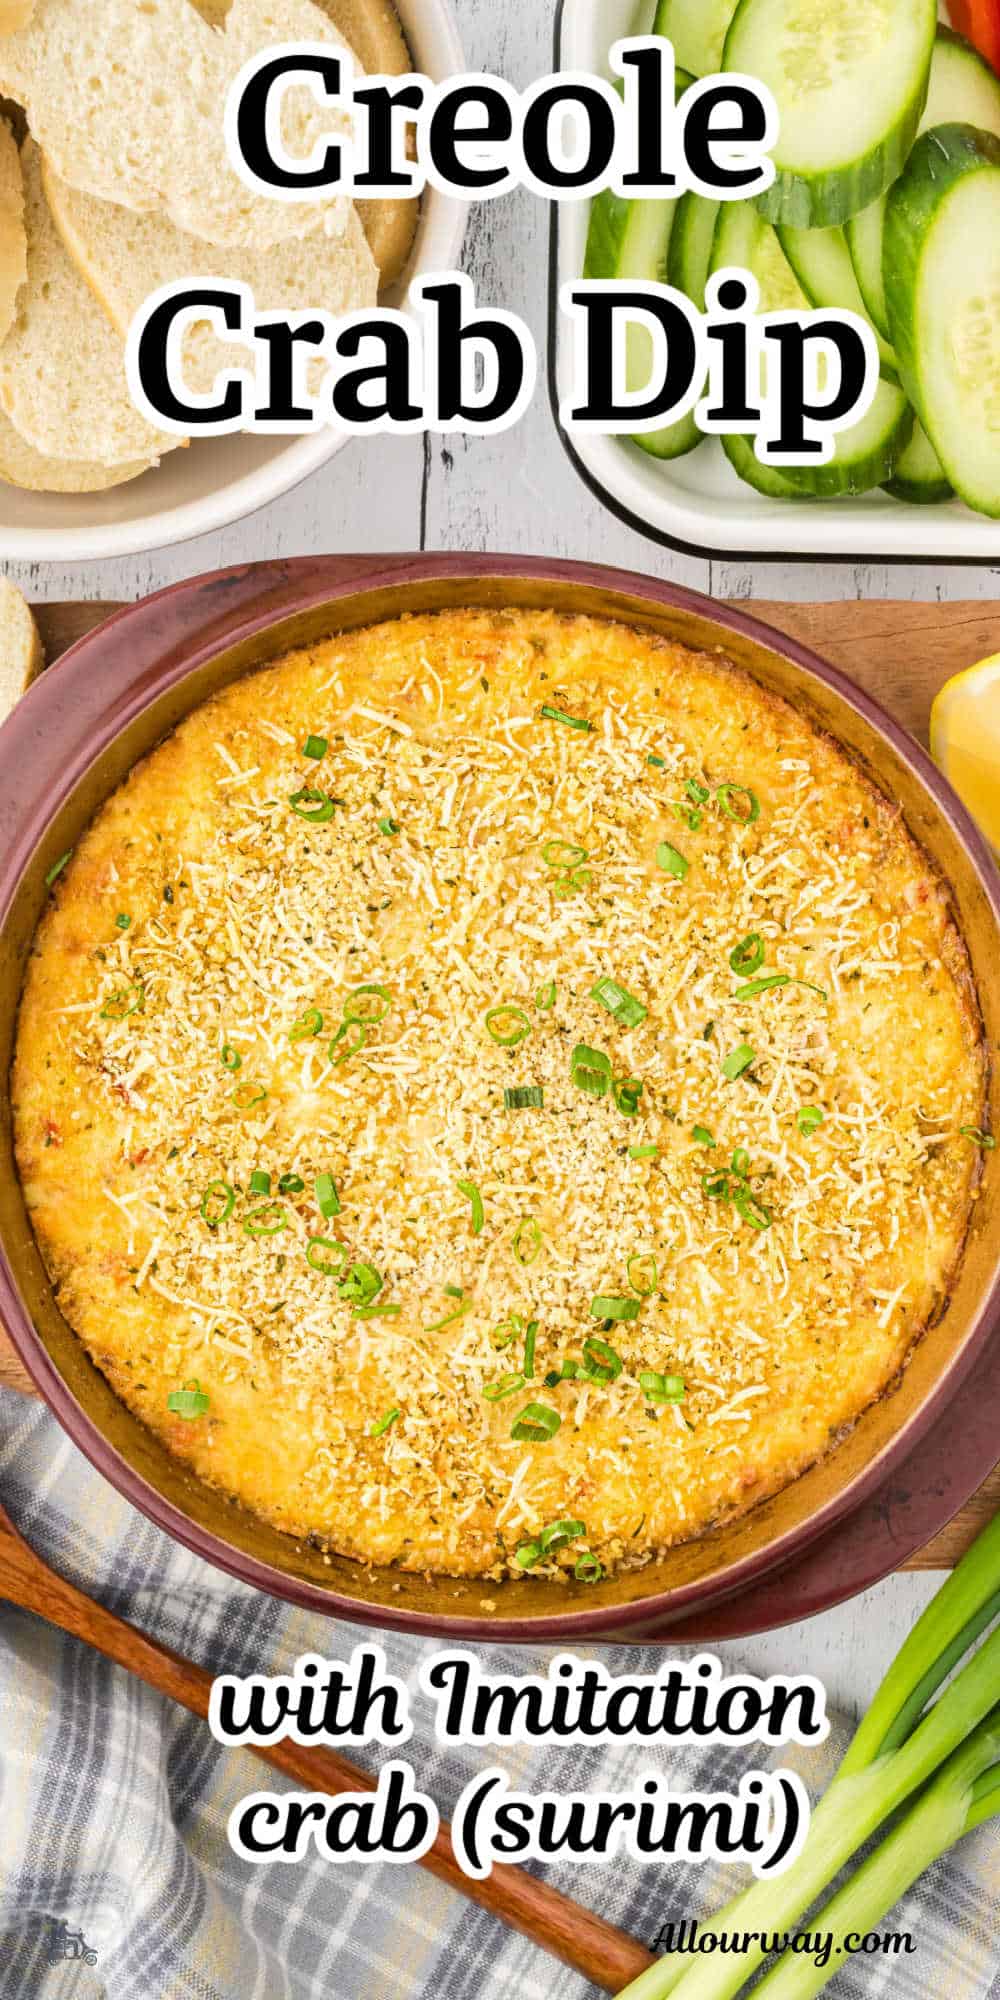 A Pinterest image with a title overlay for Creole Crab Dip made with Imitation Crab meat (surimi).